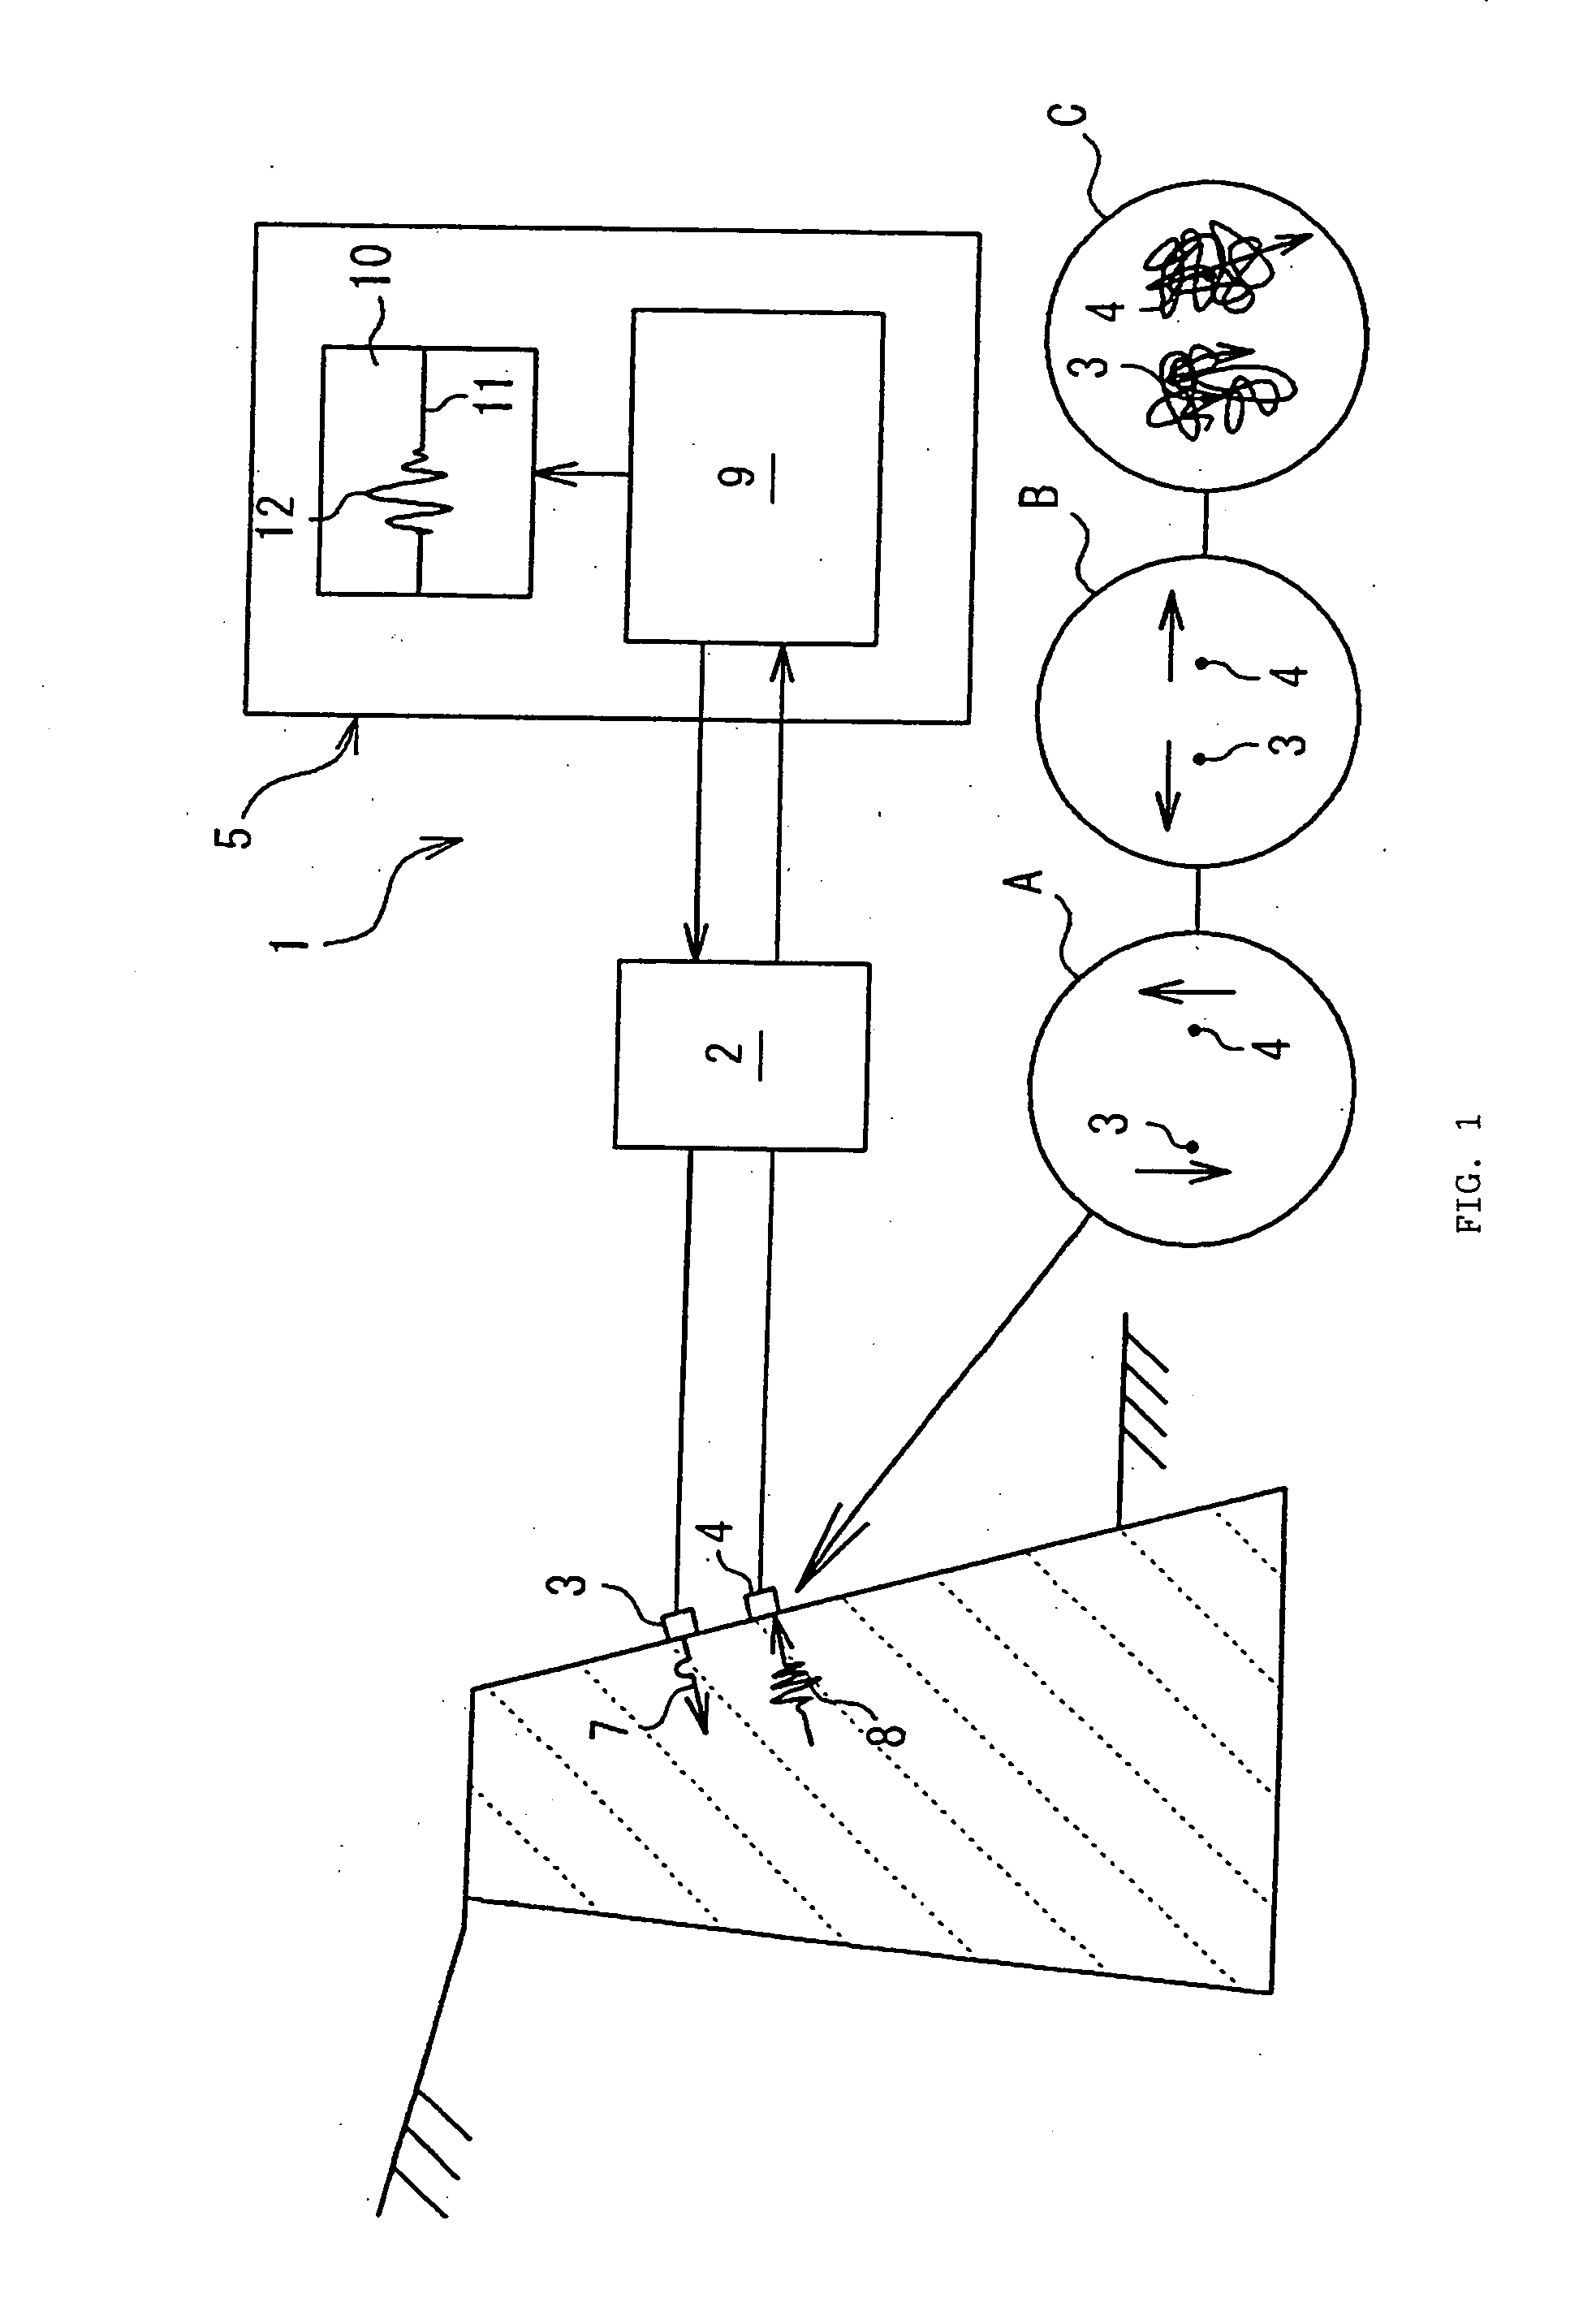 Method and apparatus for non-destructive testing of concrete structures